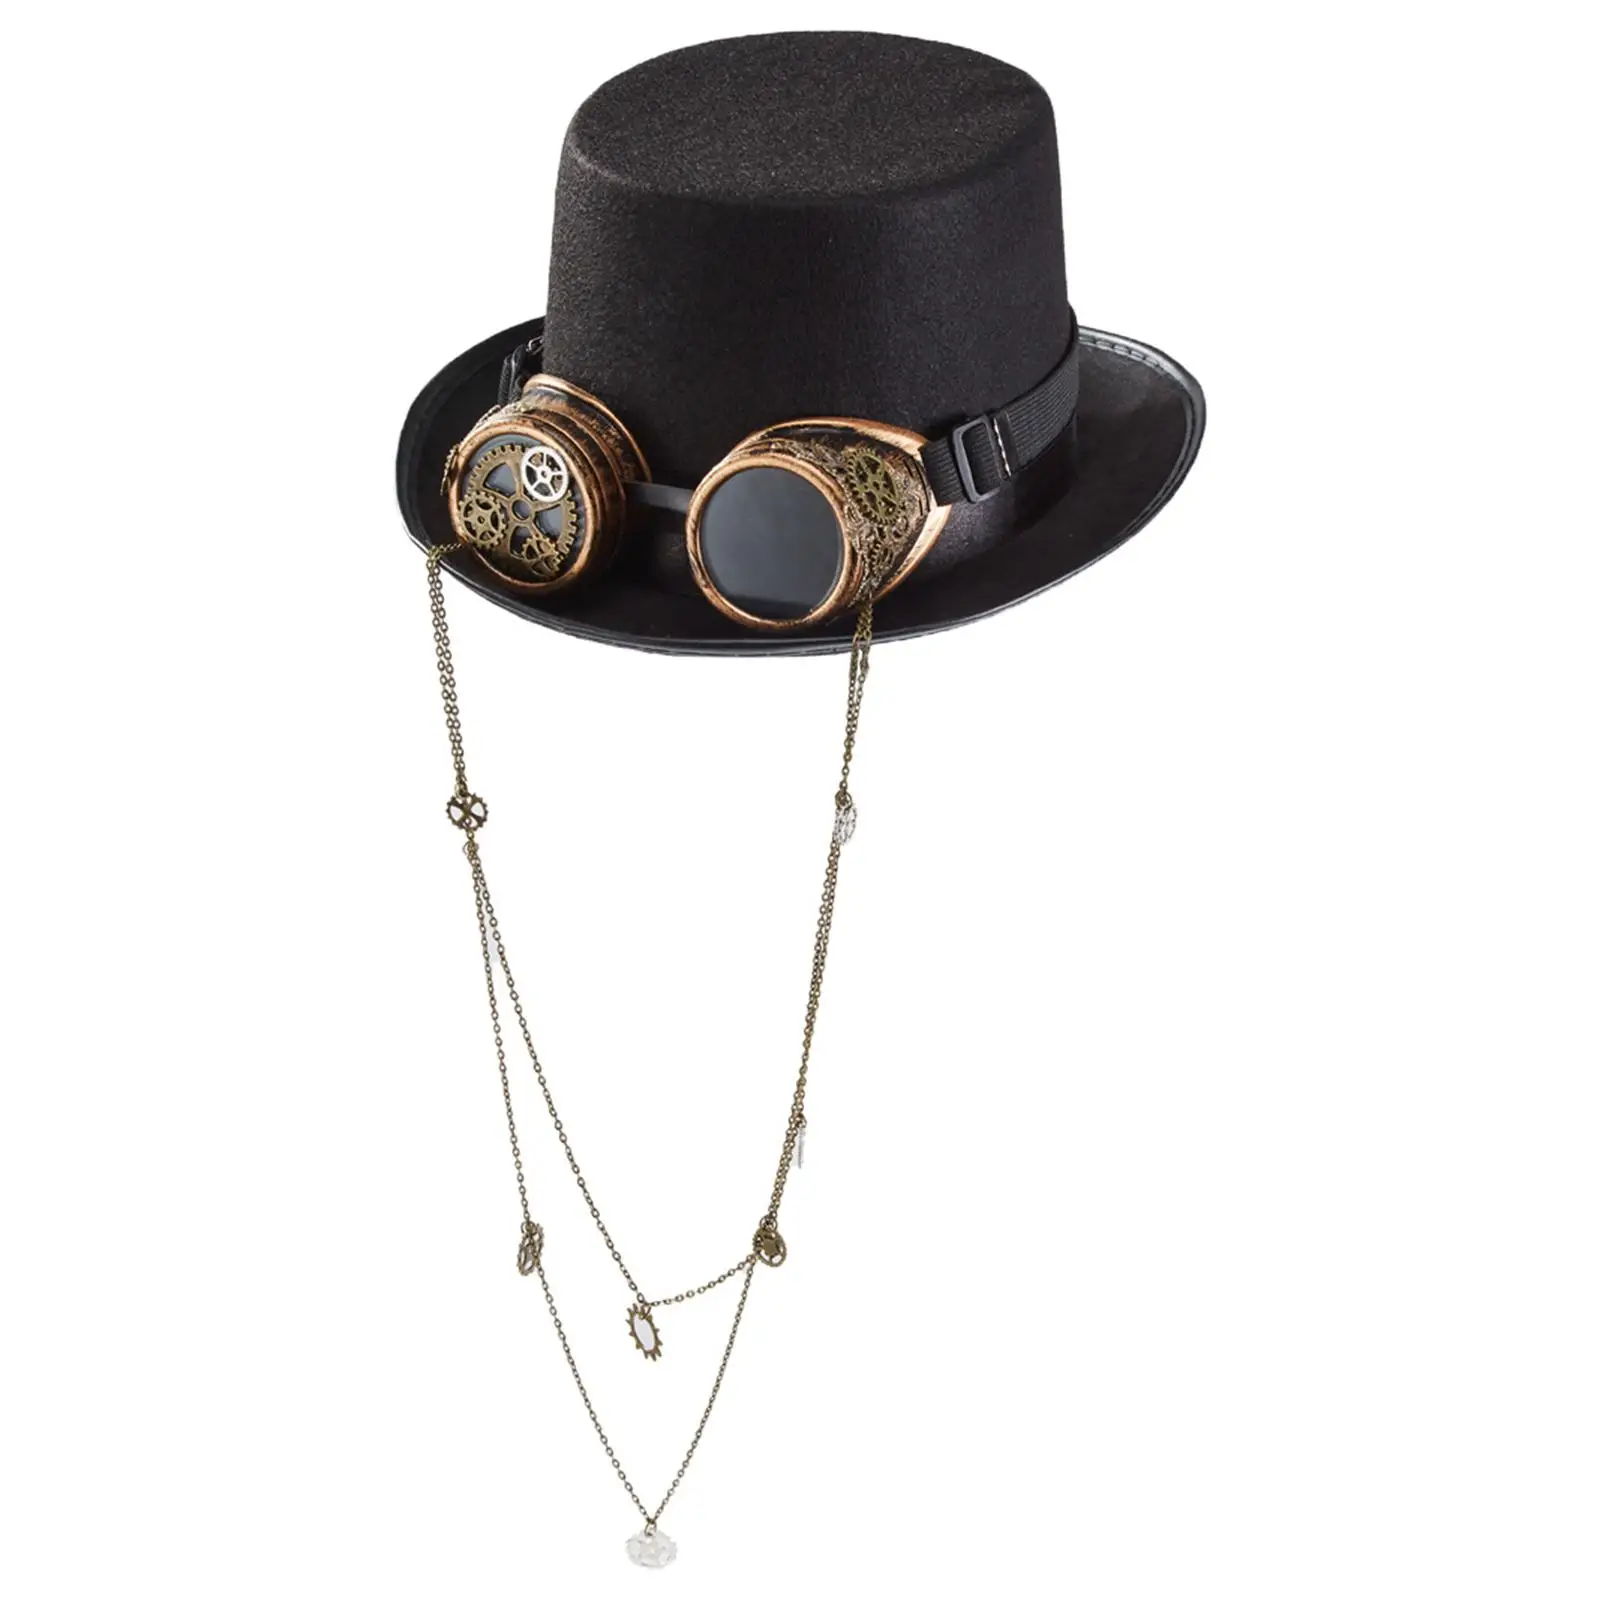 Gothic Steampunk Hat with Goggles Long Chain Black Top Hat Accessories Black